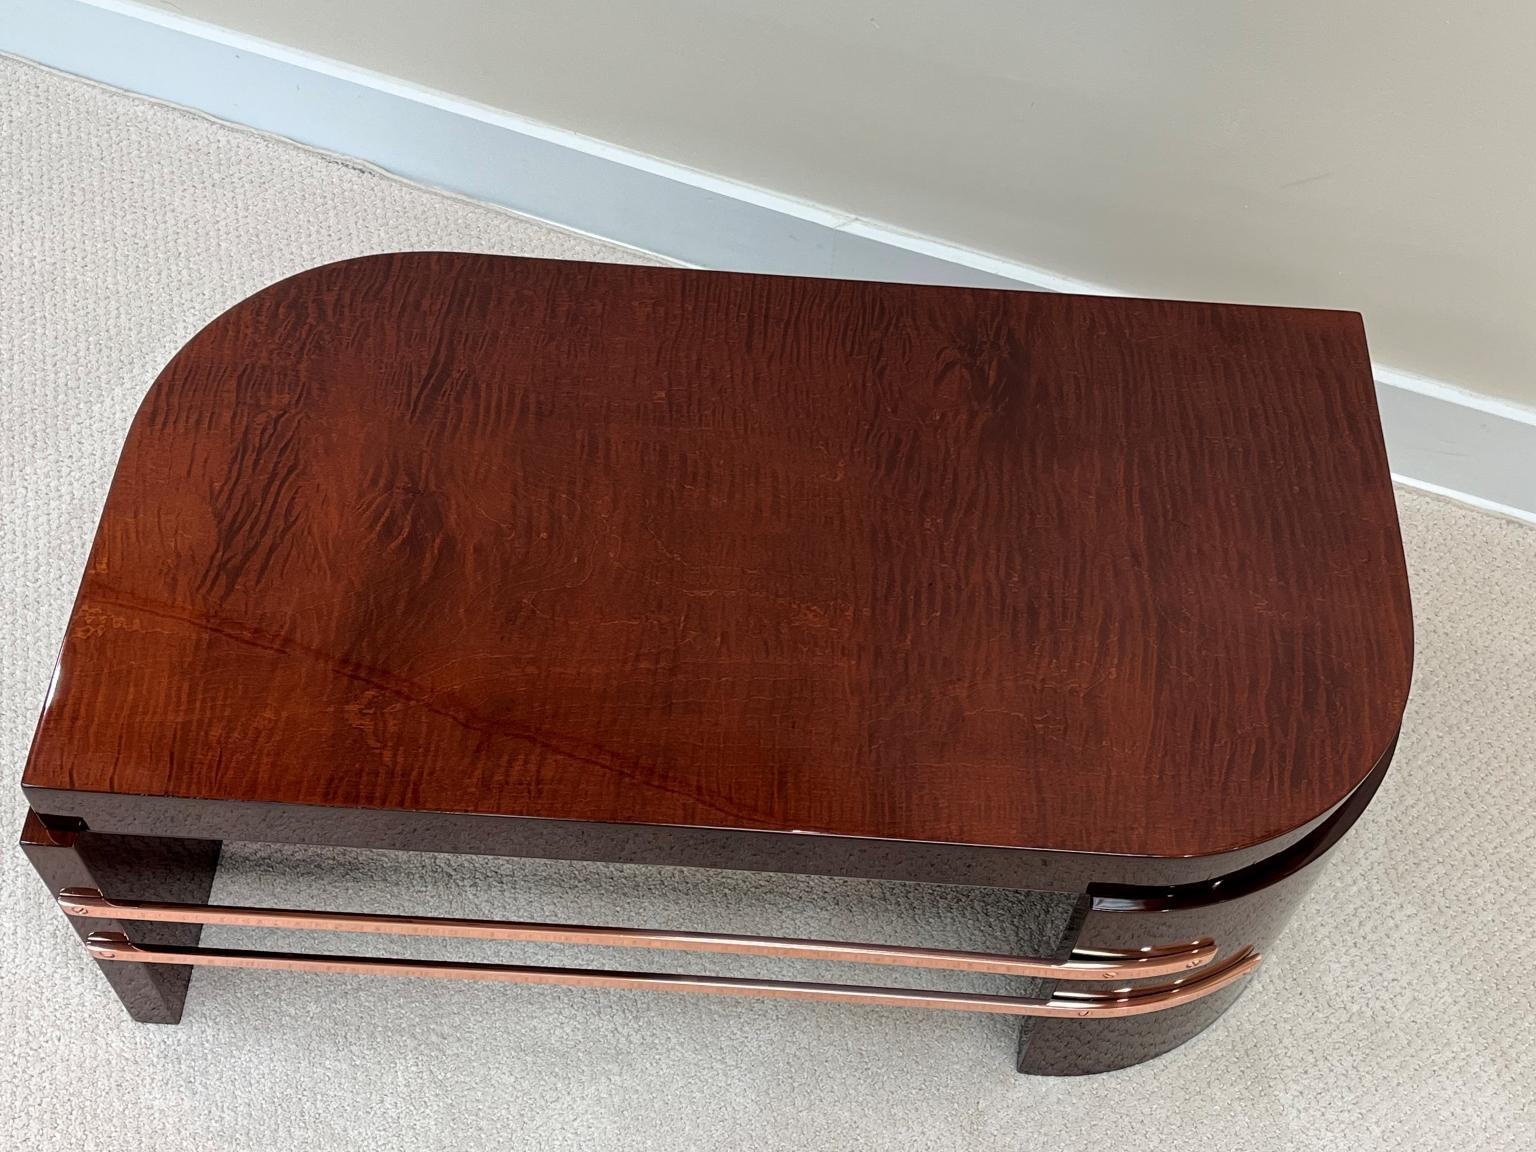  Art Deco Copper and Walnut Cocktail Table attributed to Donald Deskey C.1930 For Sale 1